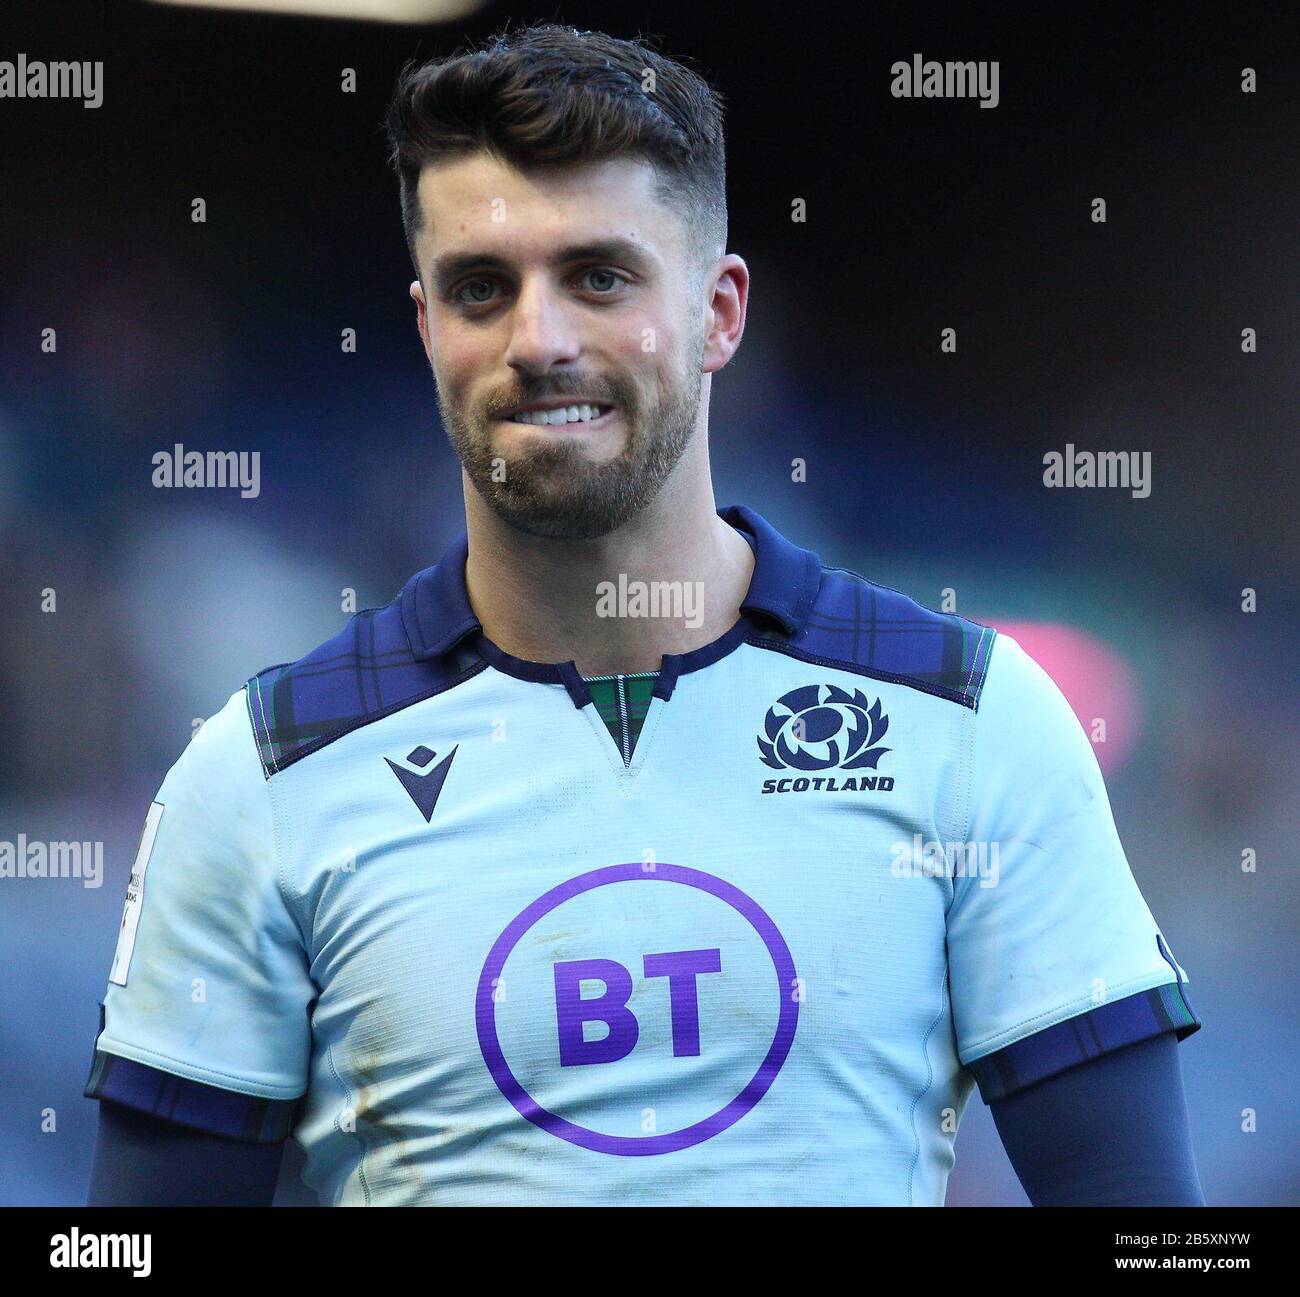 EDINBURGH, SCOTLAND - MARCH 08: Adam Hastings  during the 2020 Guinness Six Nations match between Scotland and France at Murrayfield on March 8, 2020 in Edinburgh, Scotland. (Photo by MB Media) Stock Photo